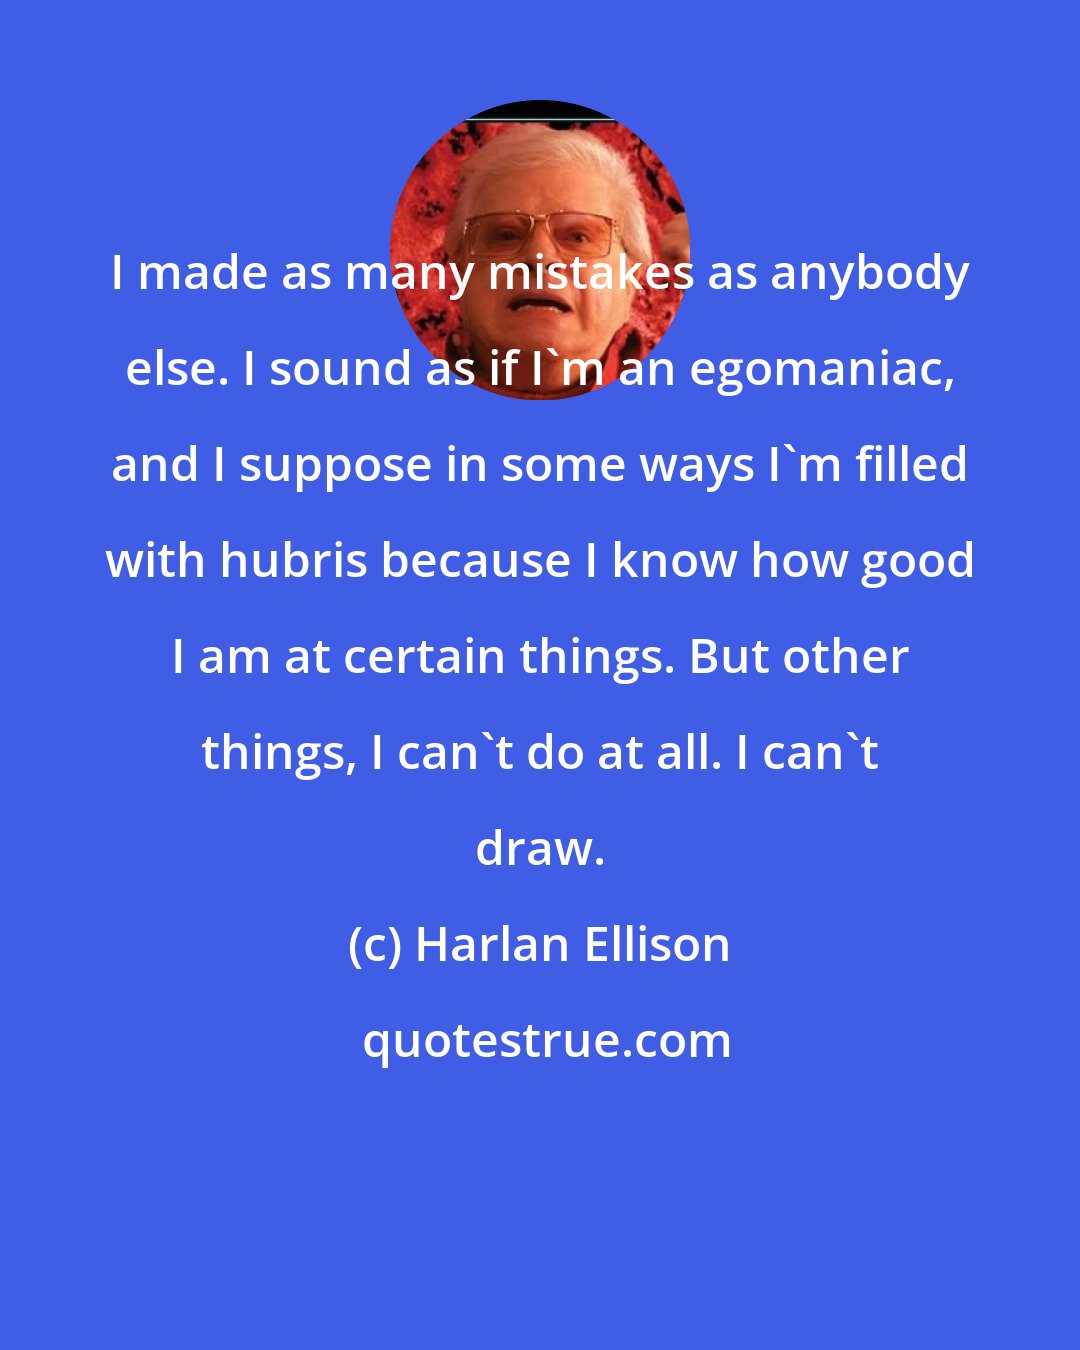 Harlan Ellison: I made as many mistakes as anybody else. I sound as if I'm an egomaniac, and I suppose in some ways I'm filled with hubris because I know how good I am at certain things. But other things, I can't do at all. I can't draw.